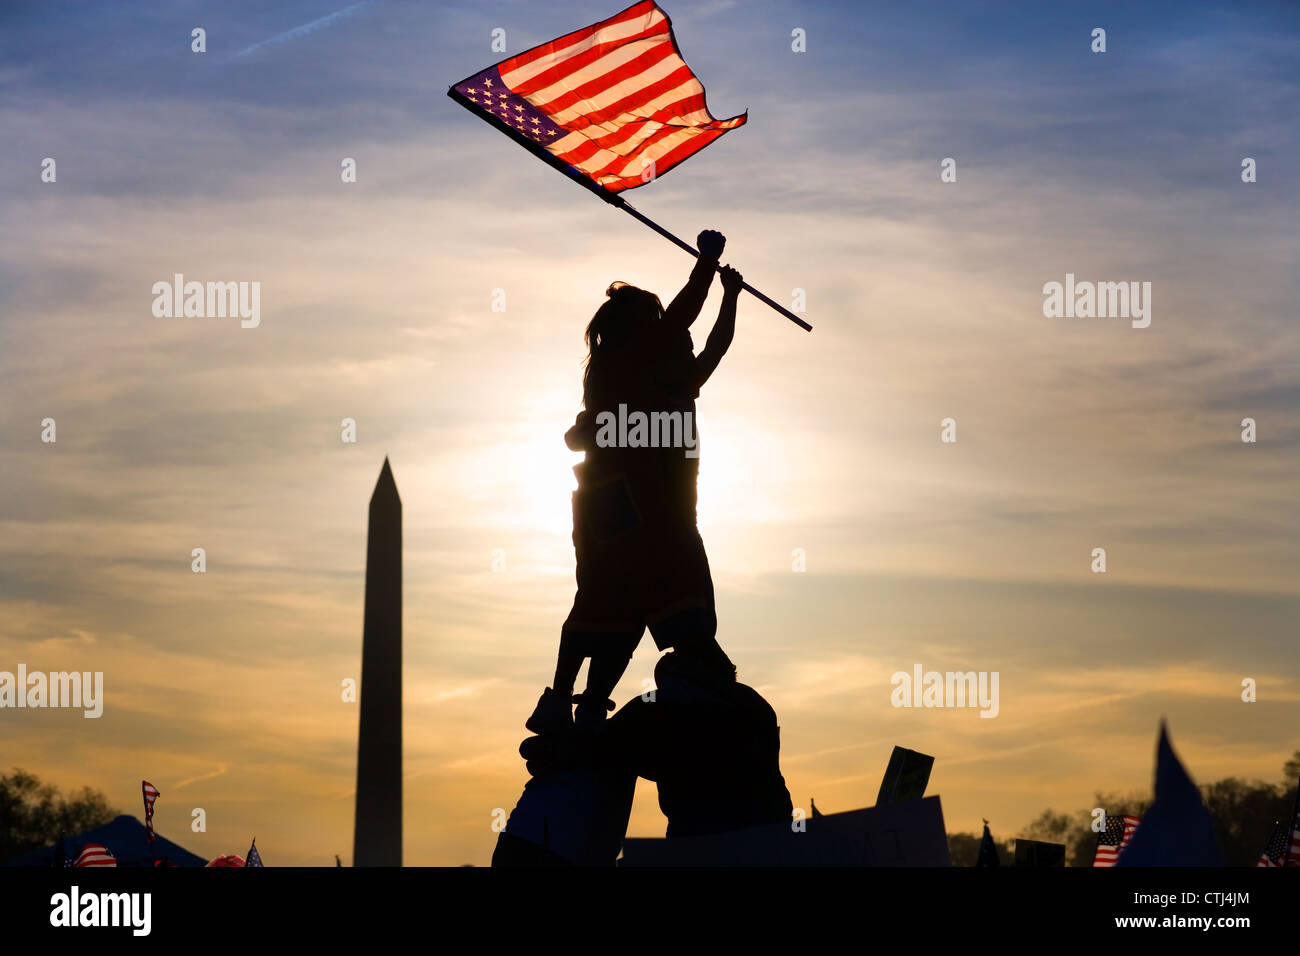 Two immigrants on top of human pyramid waving a U.S. flag in Iwo Jima fashion at march of illegal immigrants in Washington DC. Stock Photo